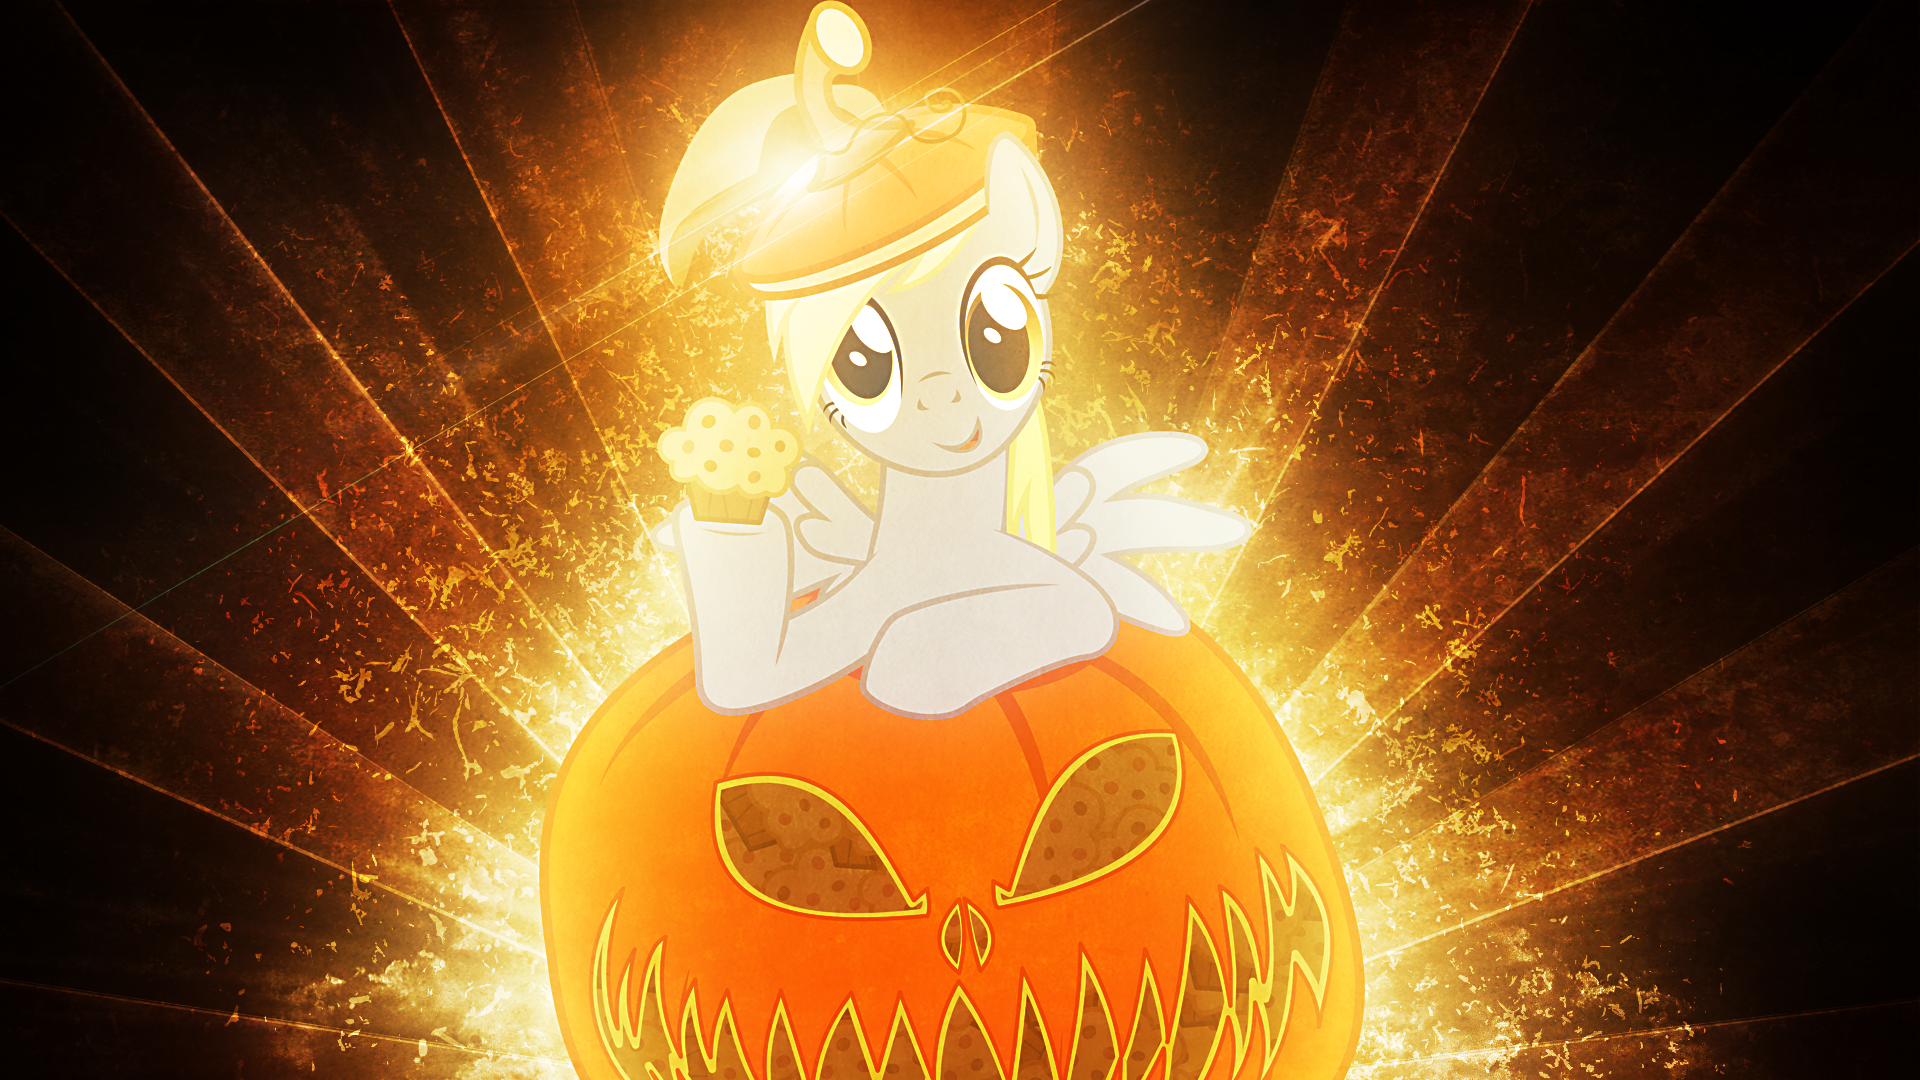 Pumpkin Derpy - Wallpaper by Tzolkine and UP1TER